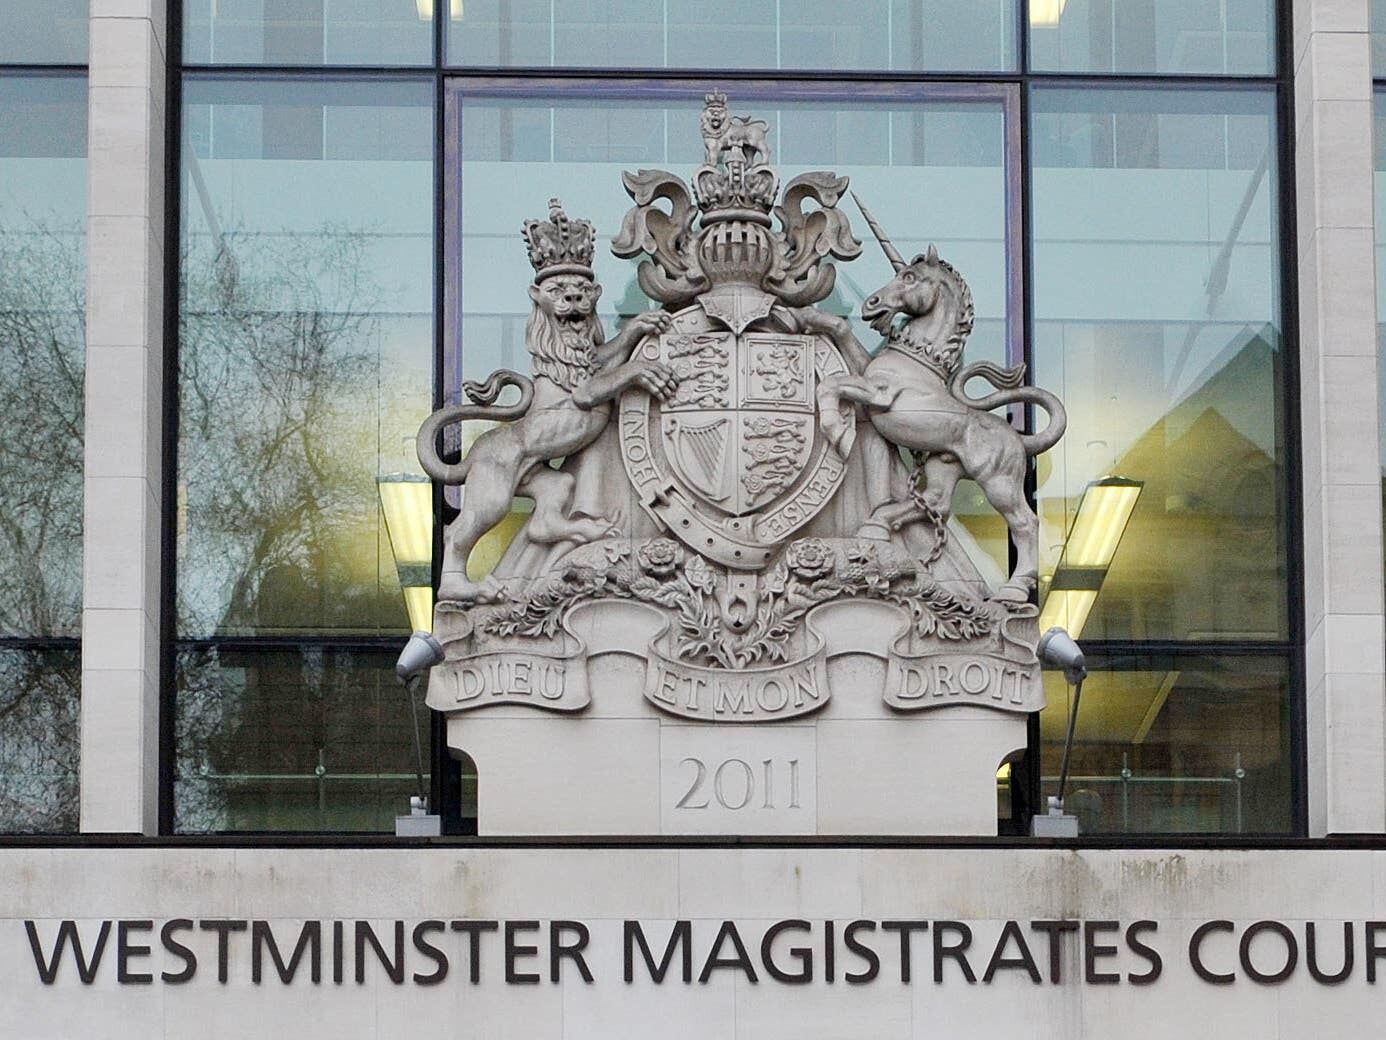 Imposter sentenced for pretending to be immigration tribunal lawyer